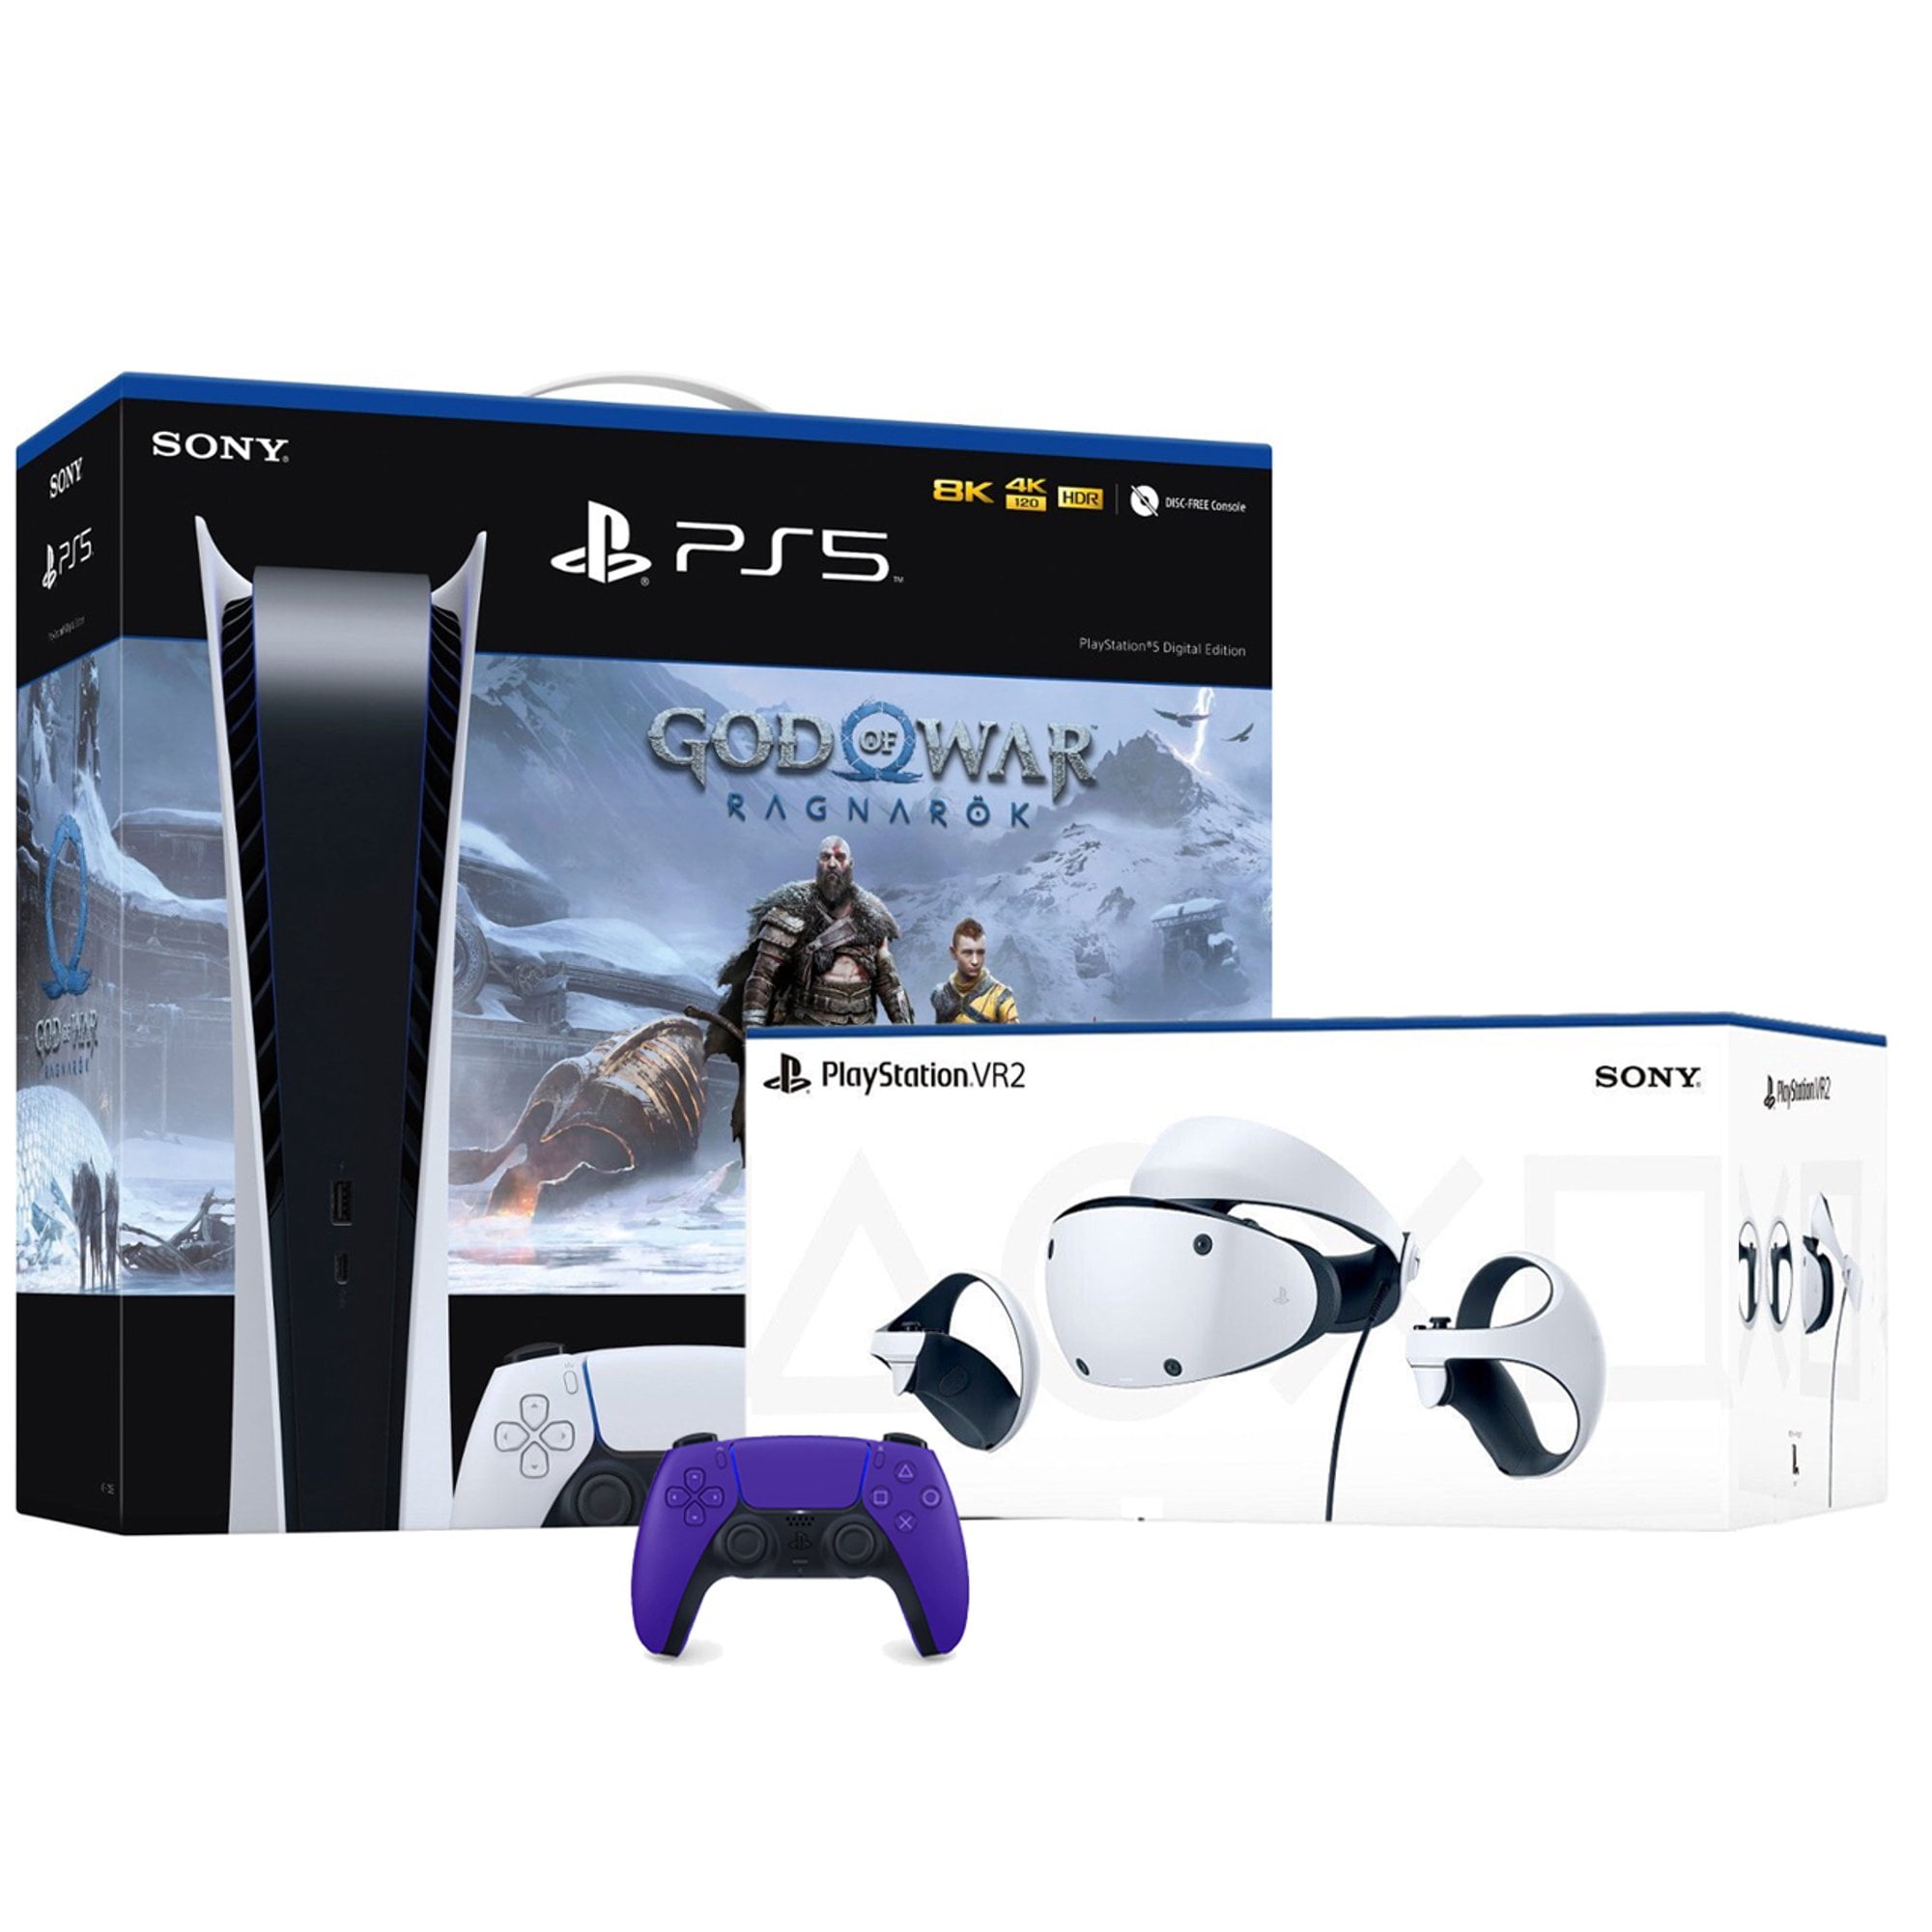 PlayStation VR2 and PlayStation_PS5 Video Game Console (Digital Version)  Combo–with Extra Galactic Purple Dualsense Controller